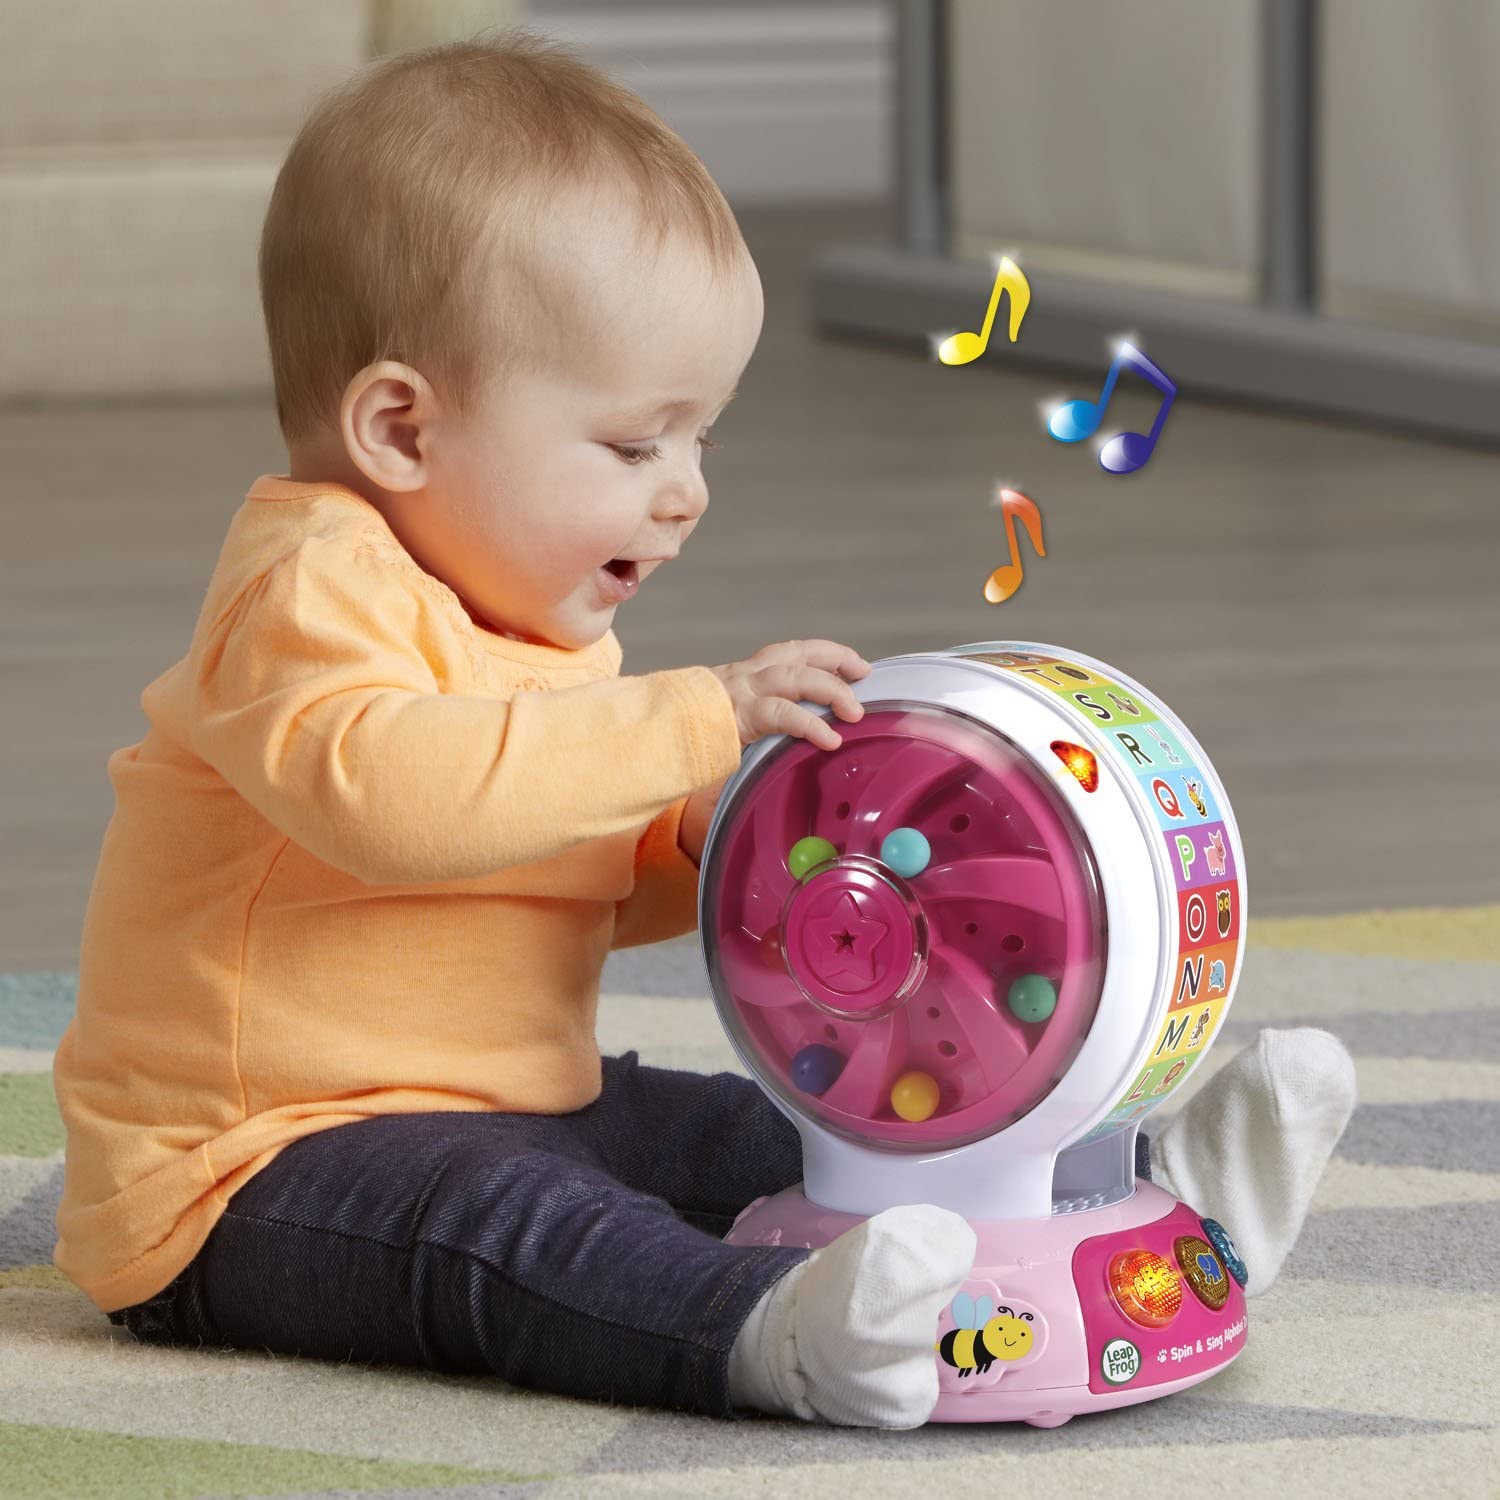 LeapFrog Spin and Sing Alphabet Zoo, Pink - Introduces letters A-Z and animal names and sounds